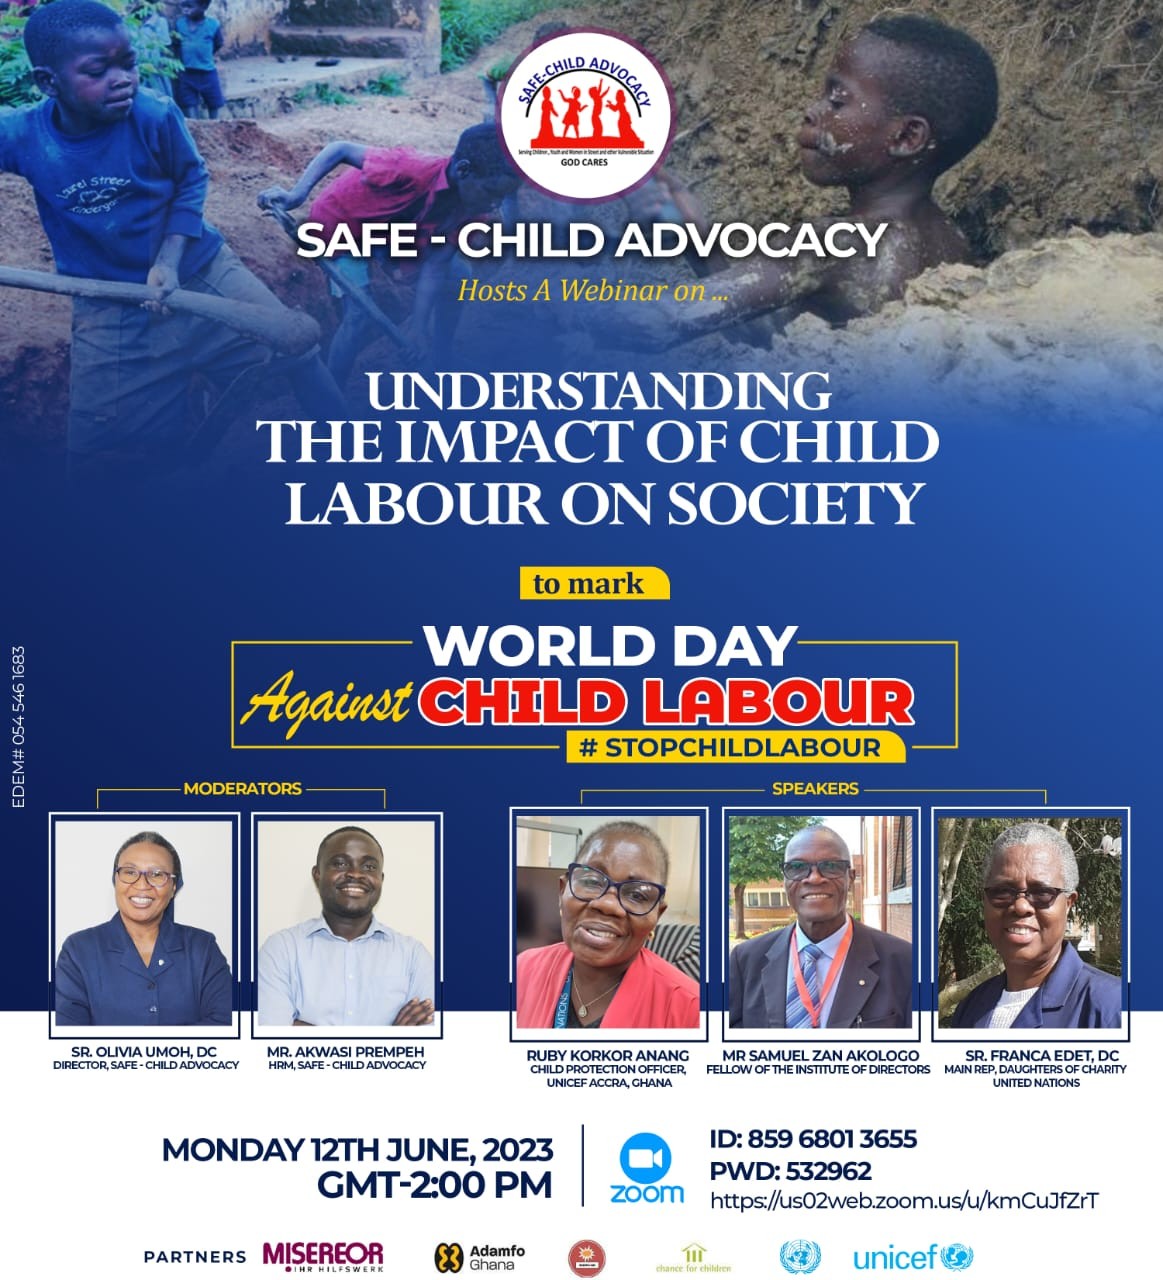 “Ending the Exploitation of Children": A Webinar on the Impact of Child Labour on Society and Strategies for the future with participants from Ghana